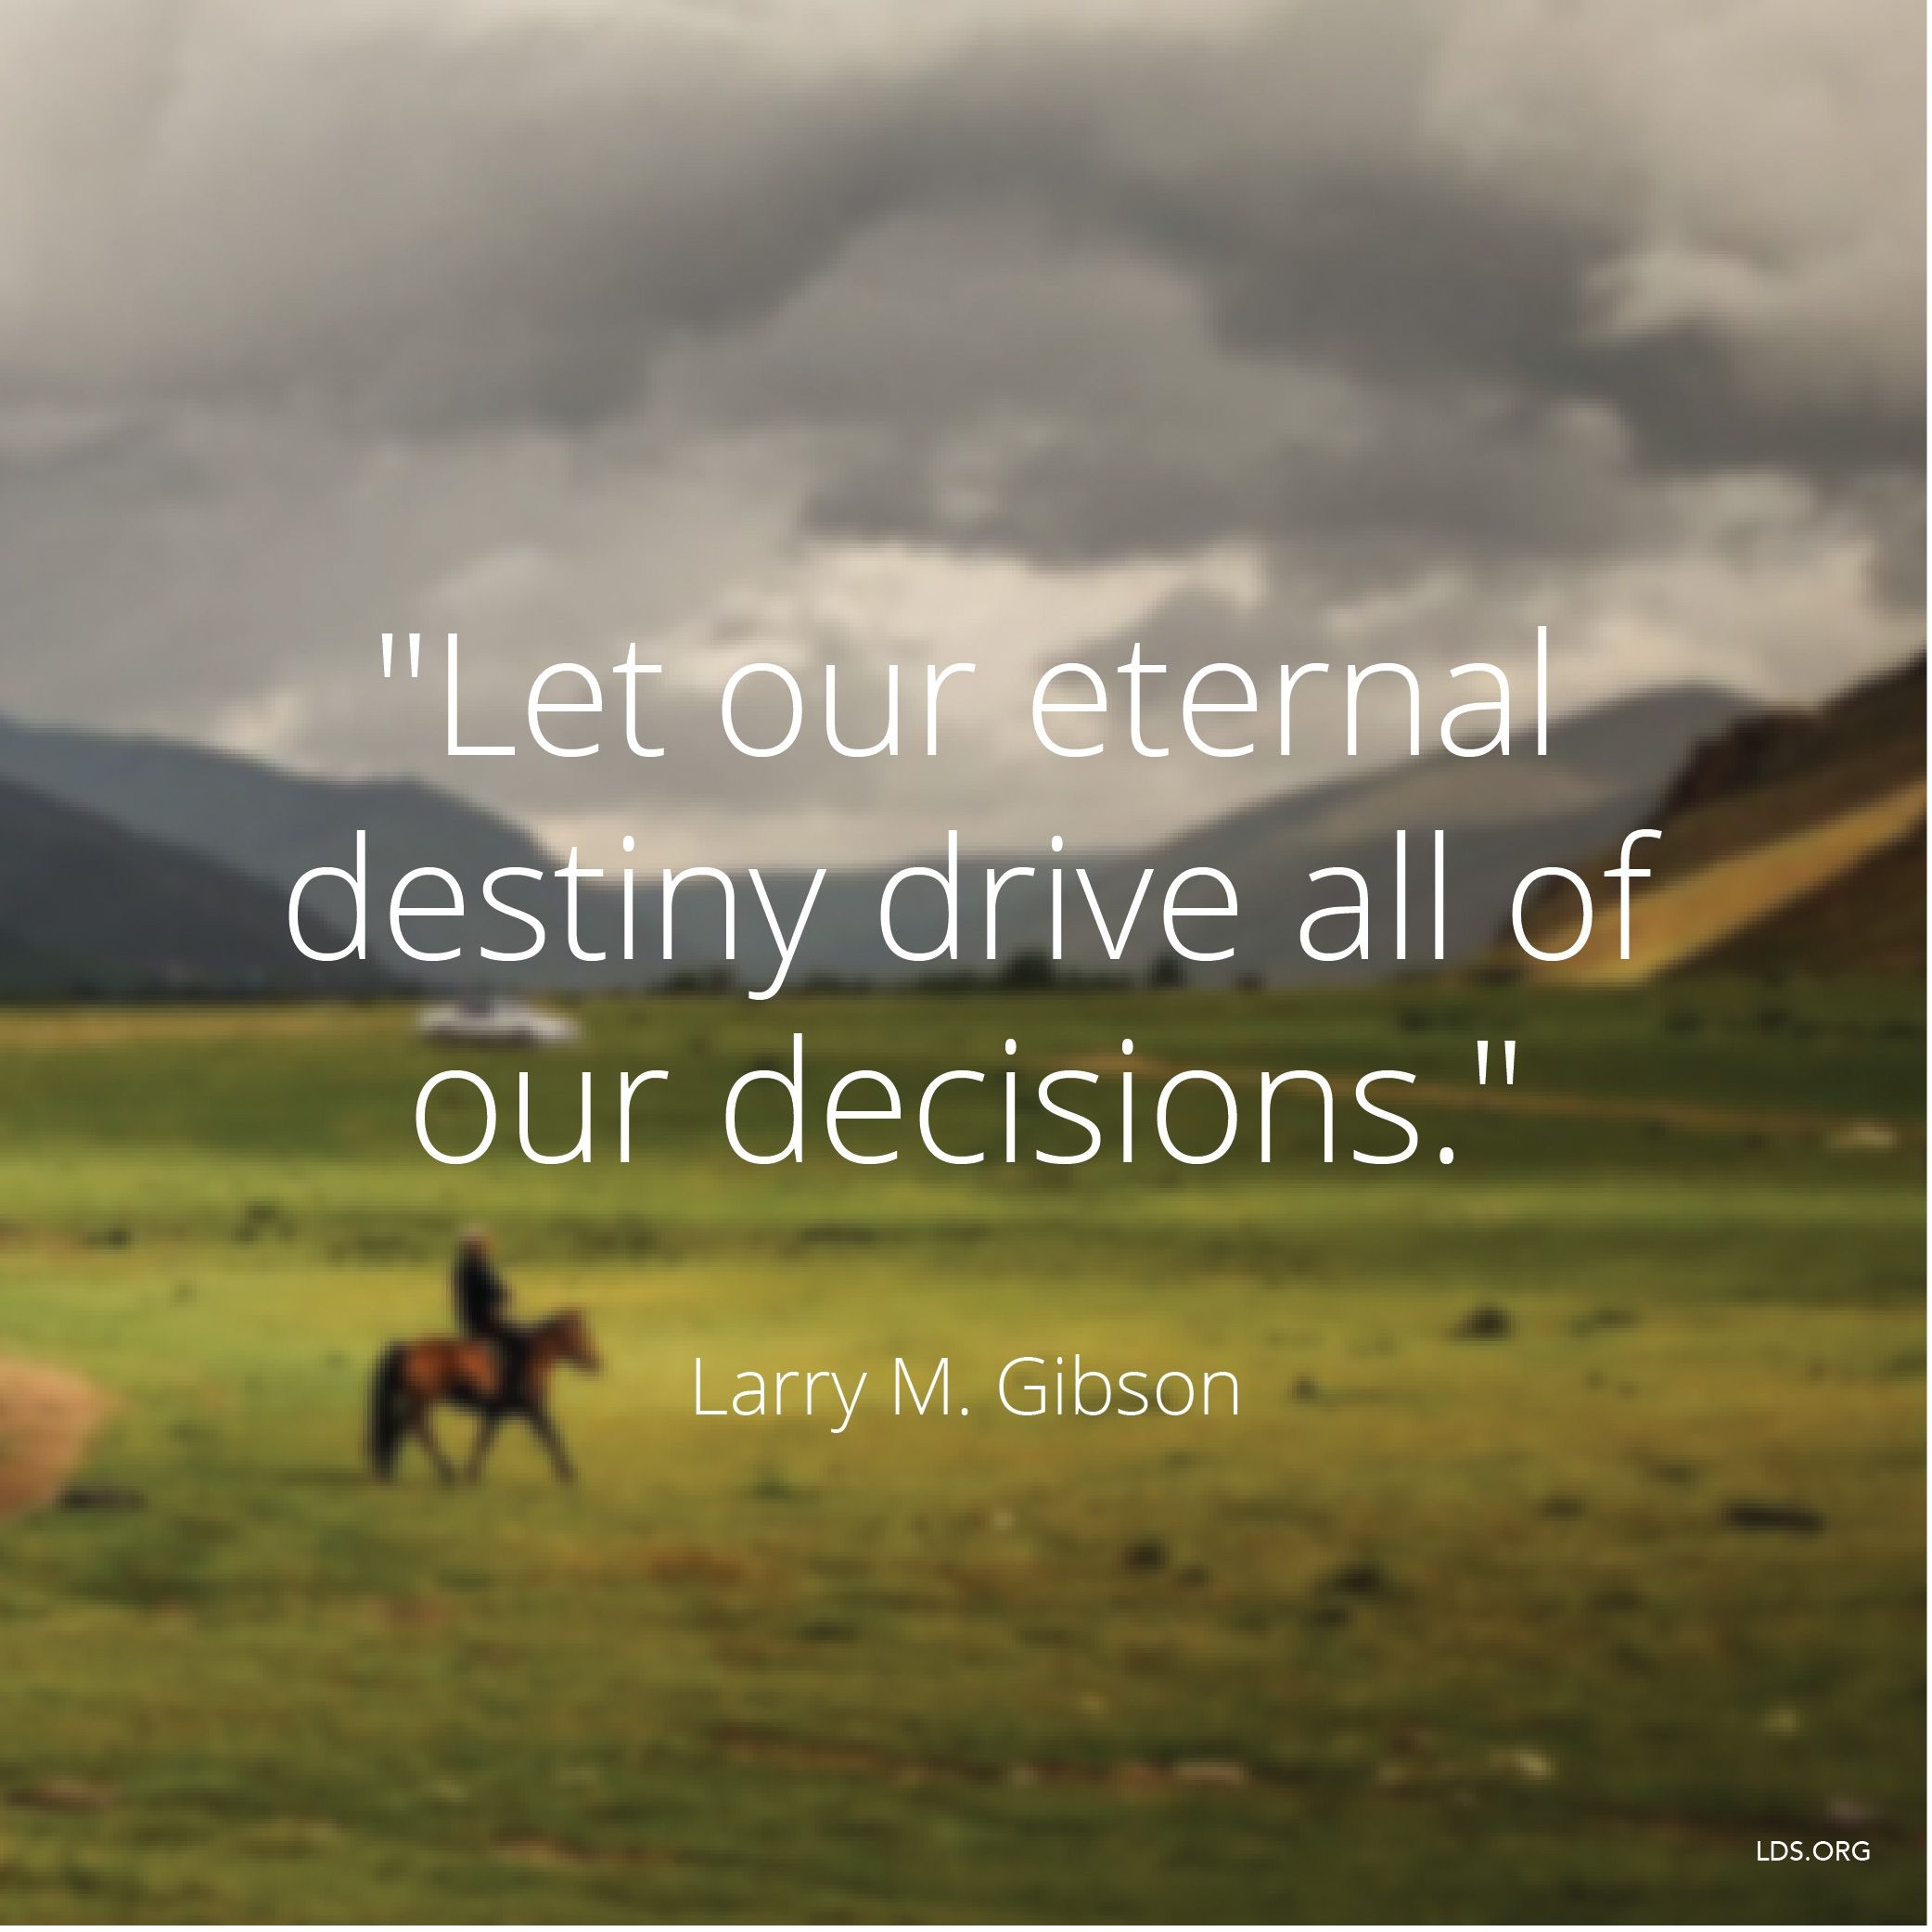 “Let our eternal destiny drive all of our decisions.”—Brother Larry M. Gibson, “Fatherhood—Our Eternal Destiny”